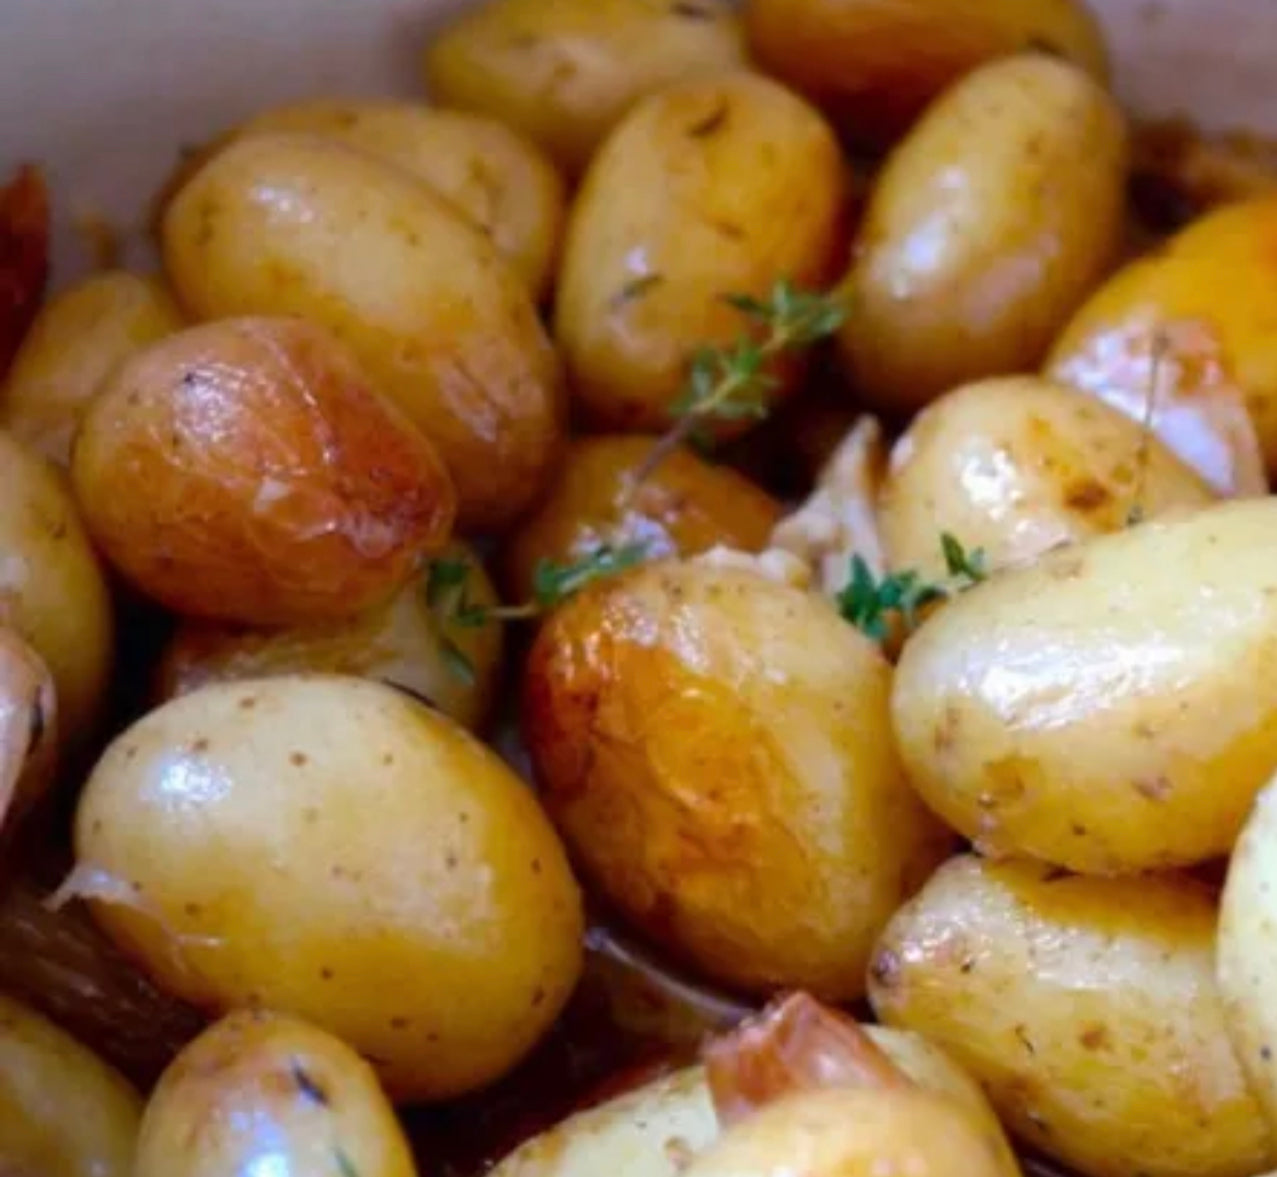 New hash brown potatoes with parsley - 400g